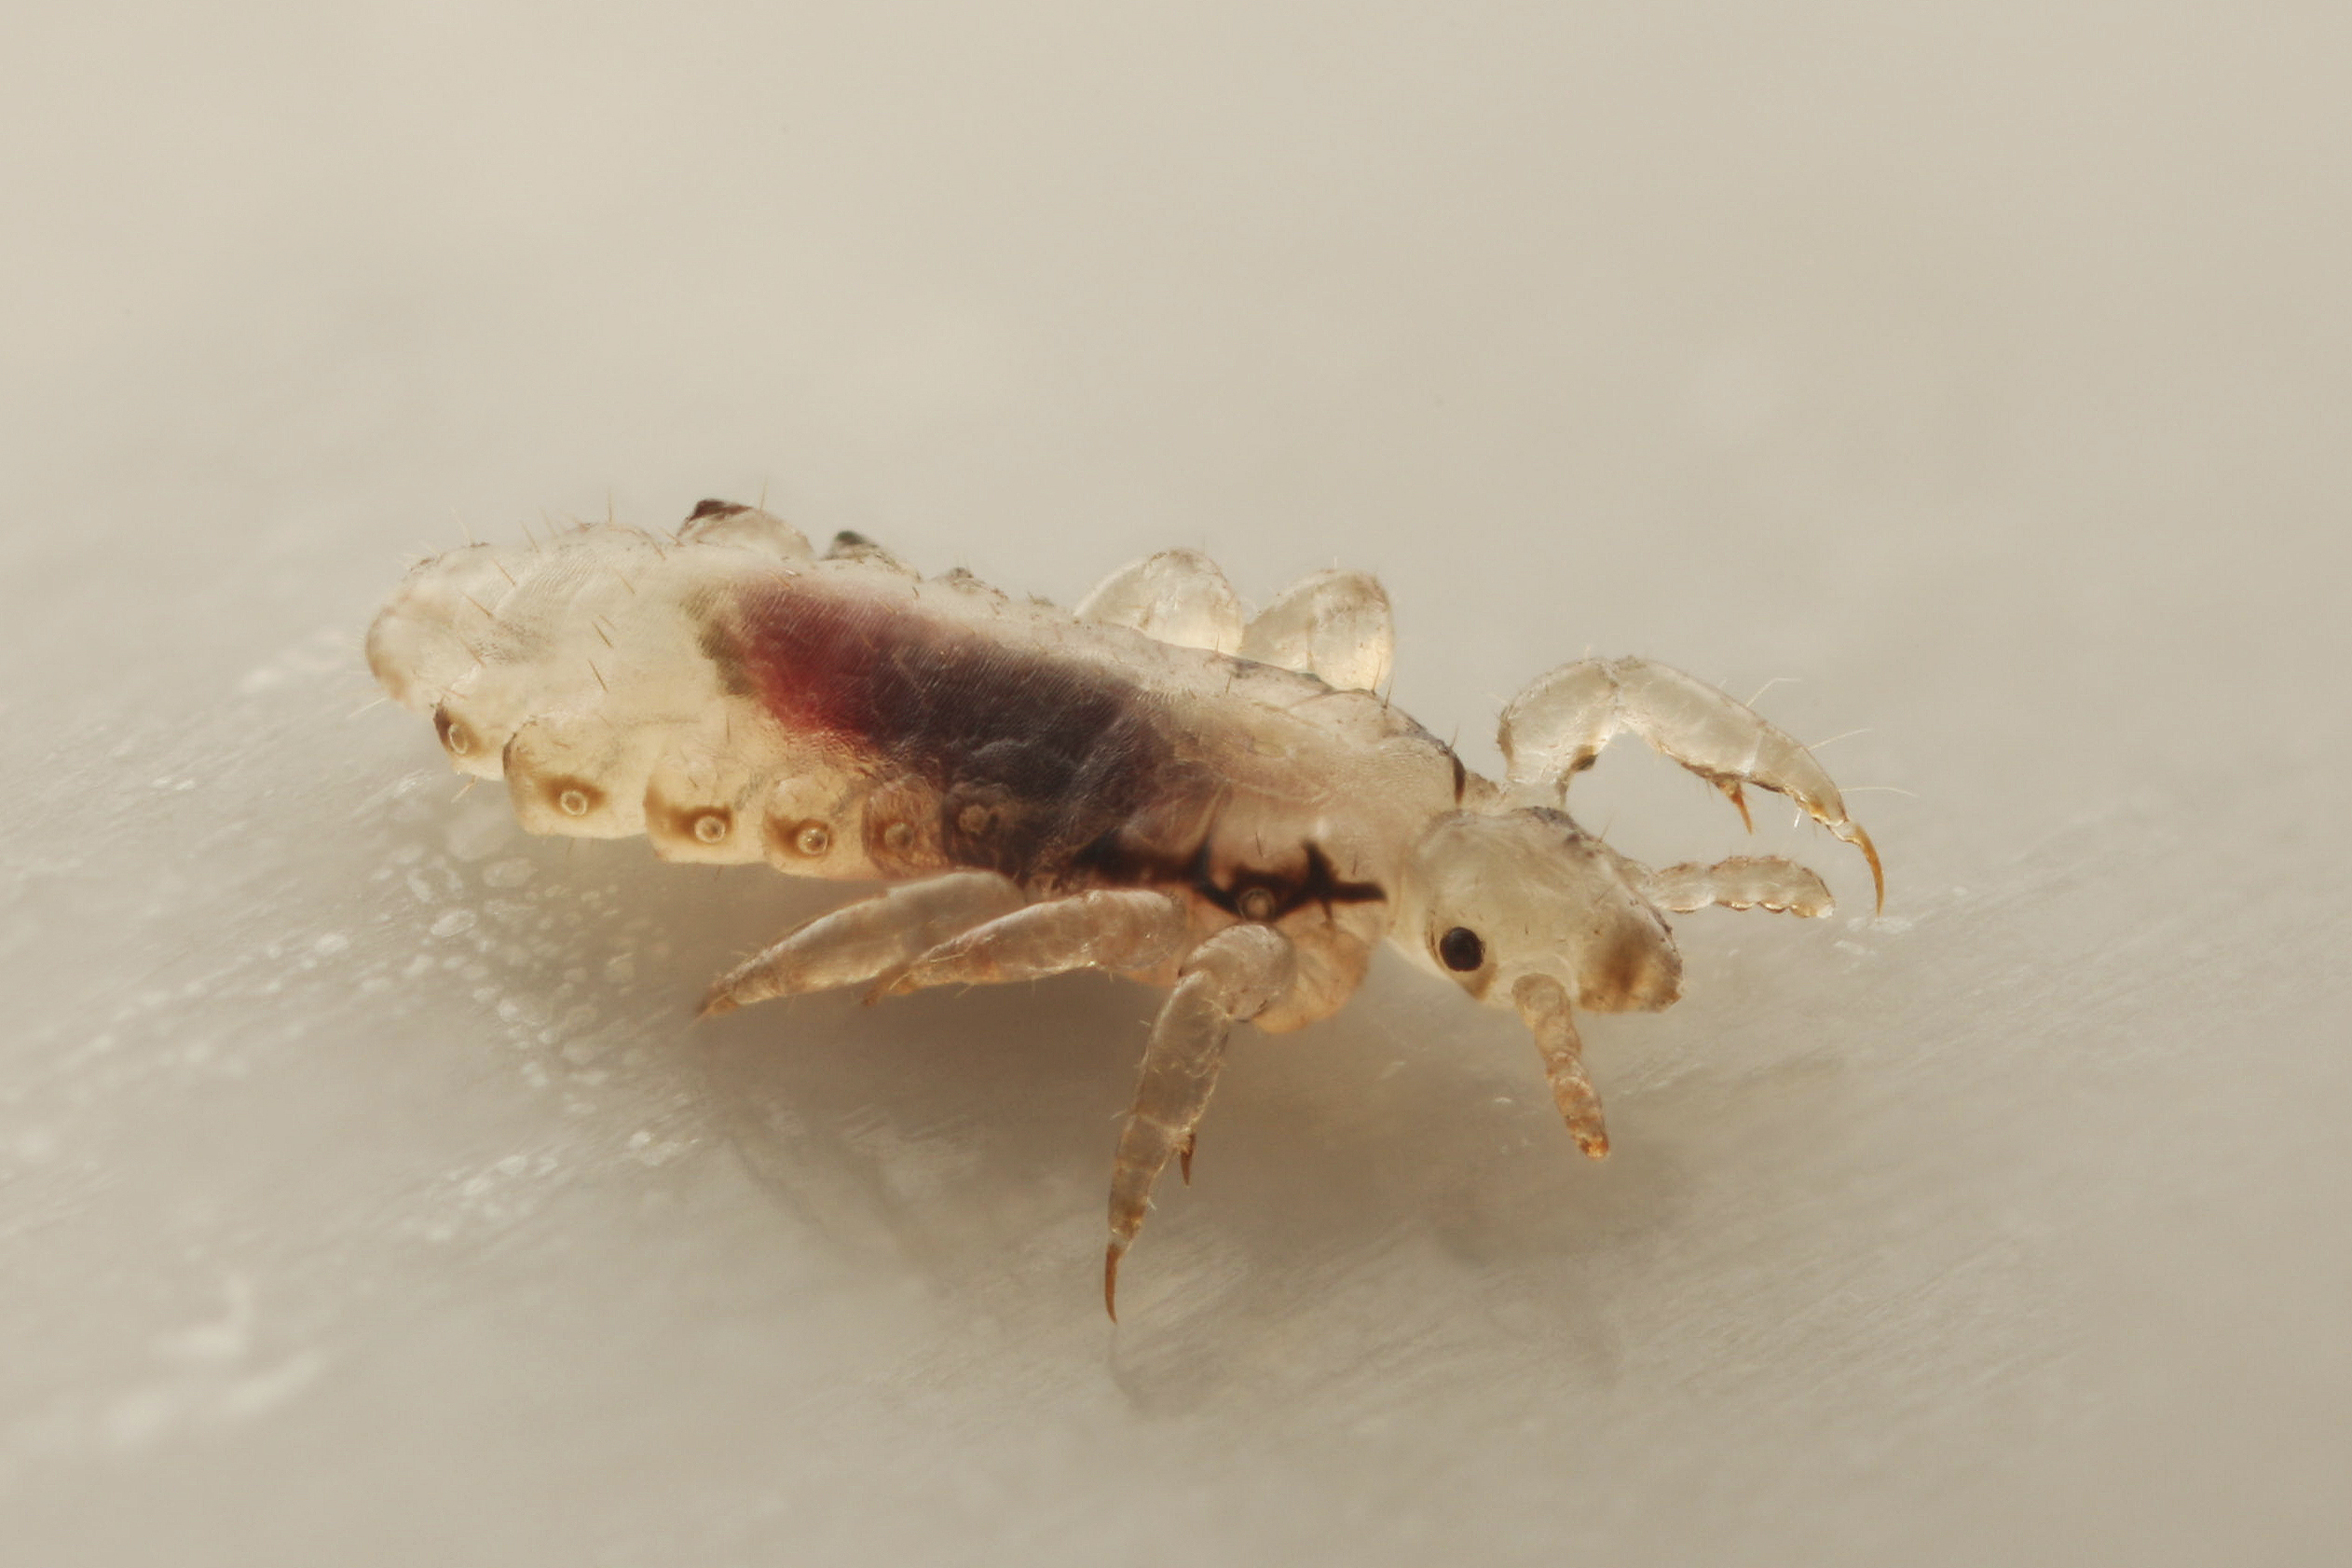 Lice have become resistant to pyrethroids. This is the toxic chemical used in anti-lice treatments. Here are natural solutions to get rid of the parasites.